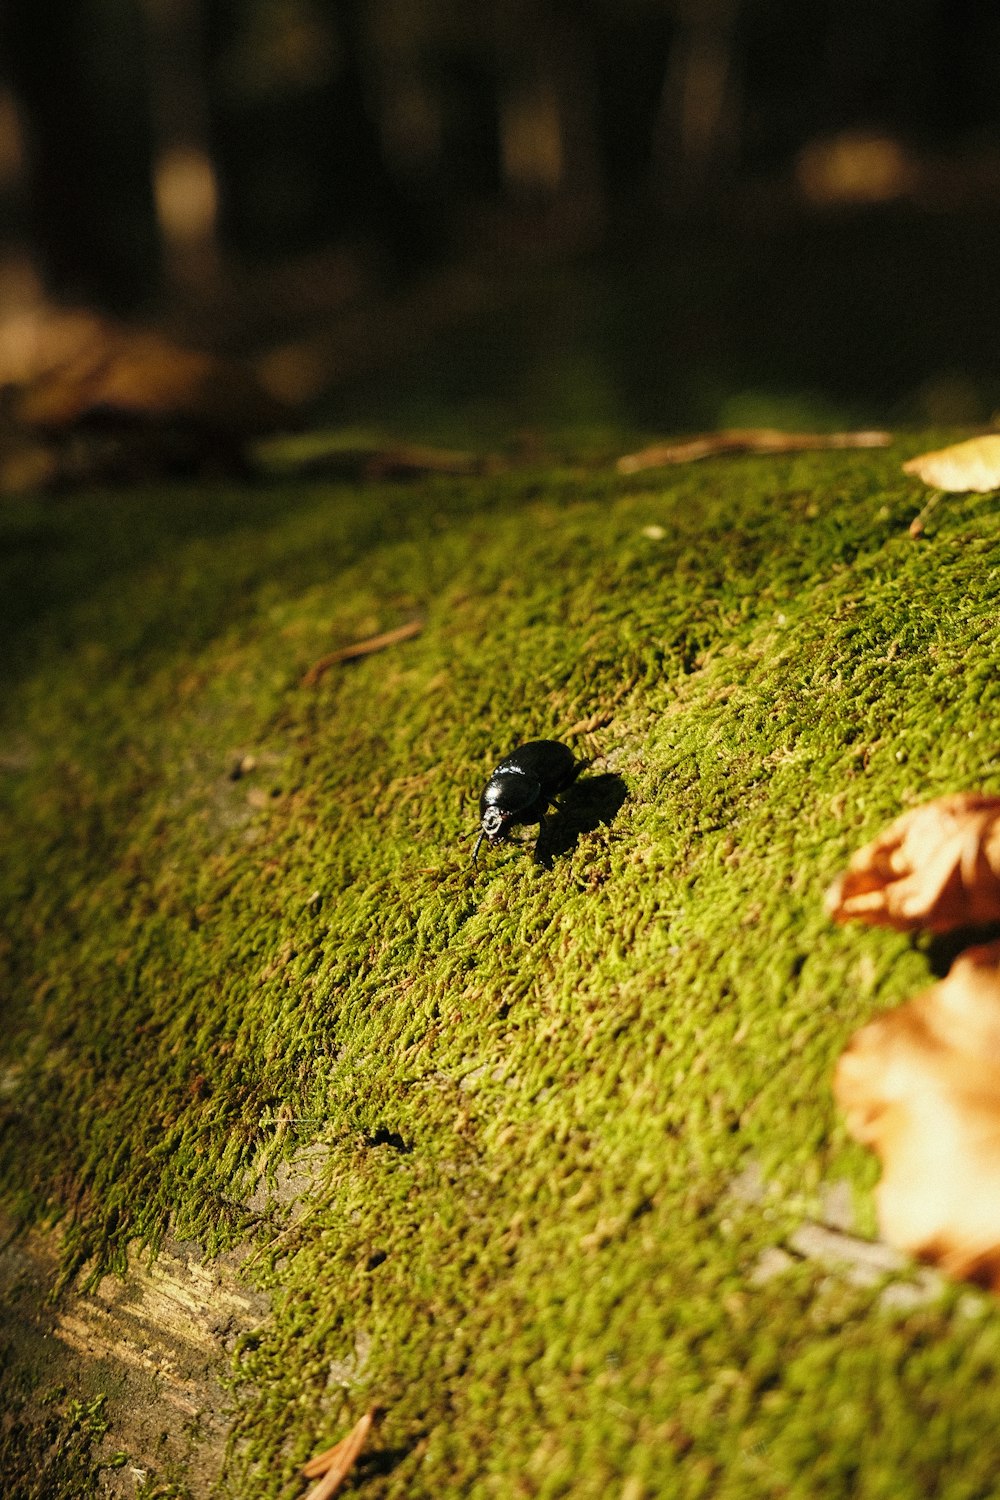 a small black object on a mossy surface